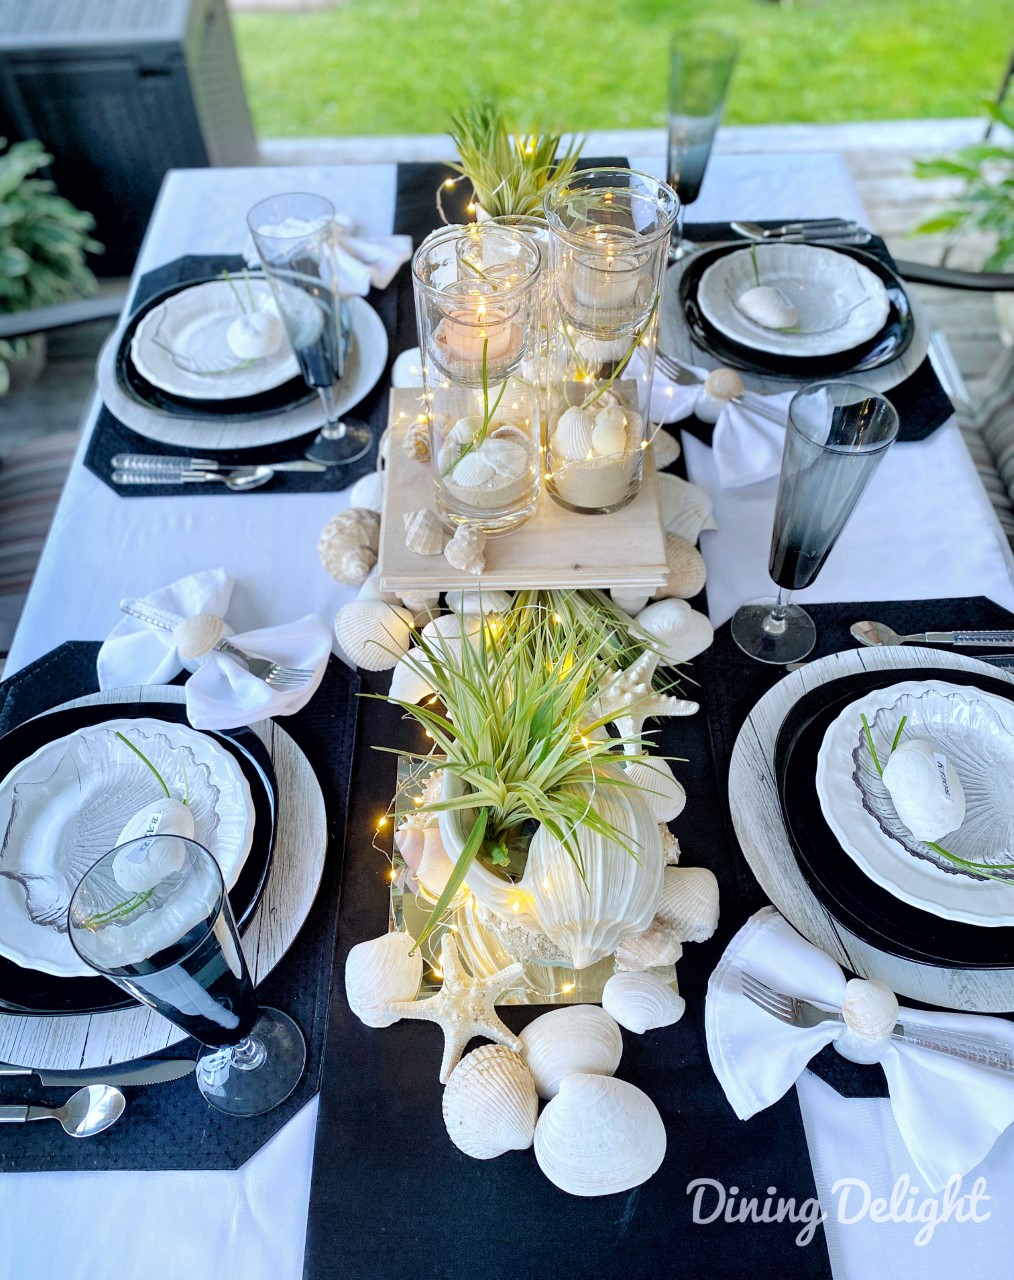 Dining Delight: Coastal Themed Tablescape in Black & White